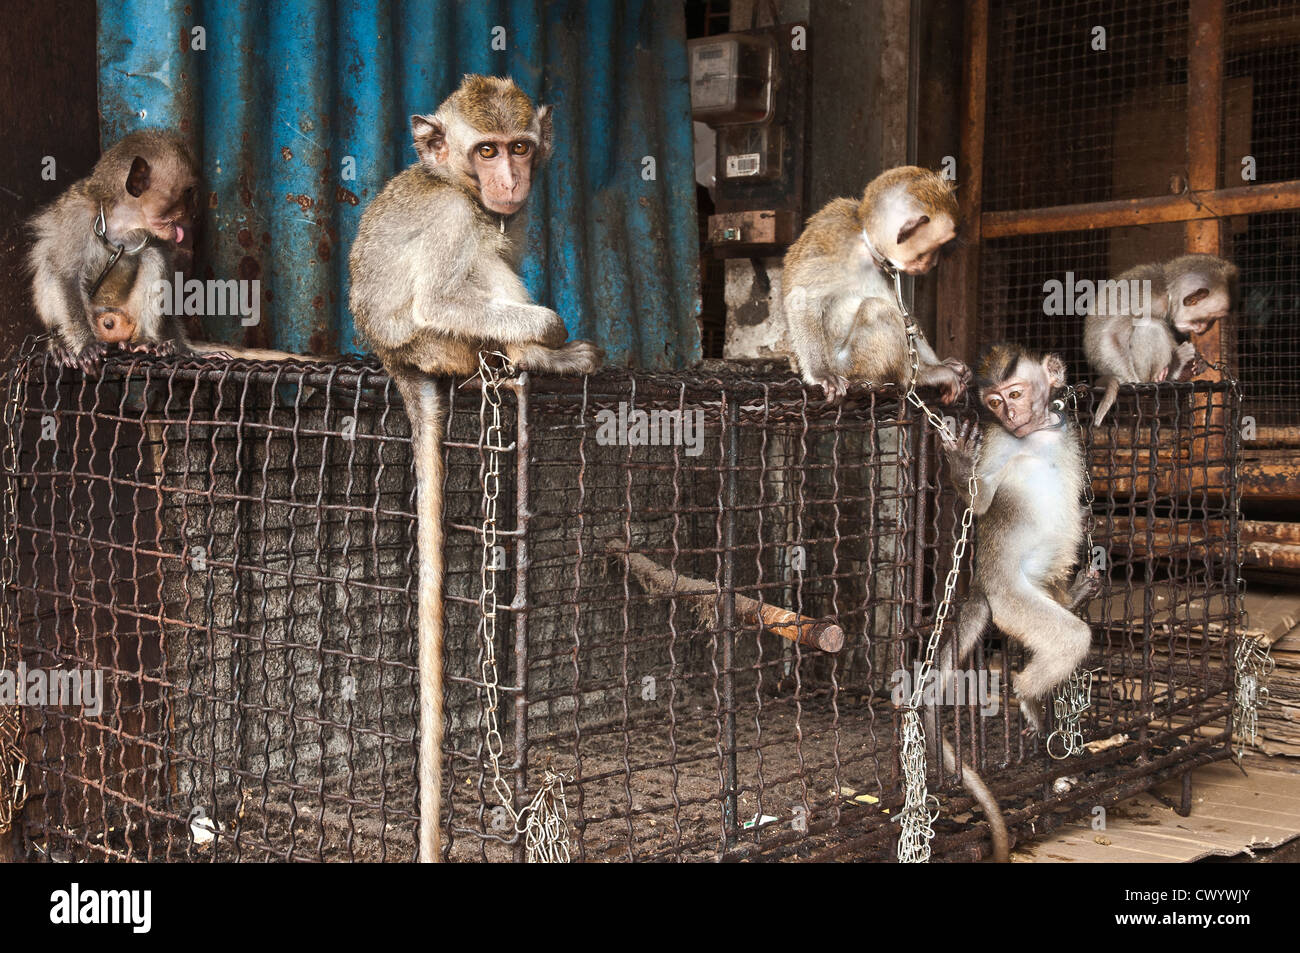 Chained, young, Macaque monkeys for sale at the bird and animal market in Denpasar, Southern Bali, Indonesia. Stock Photo